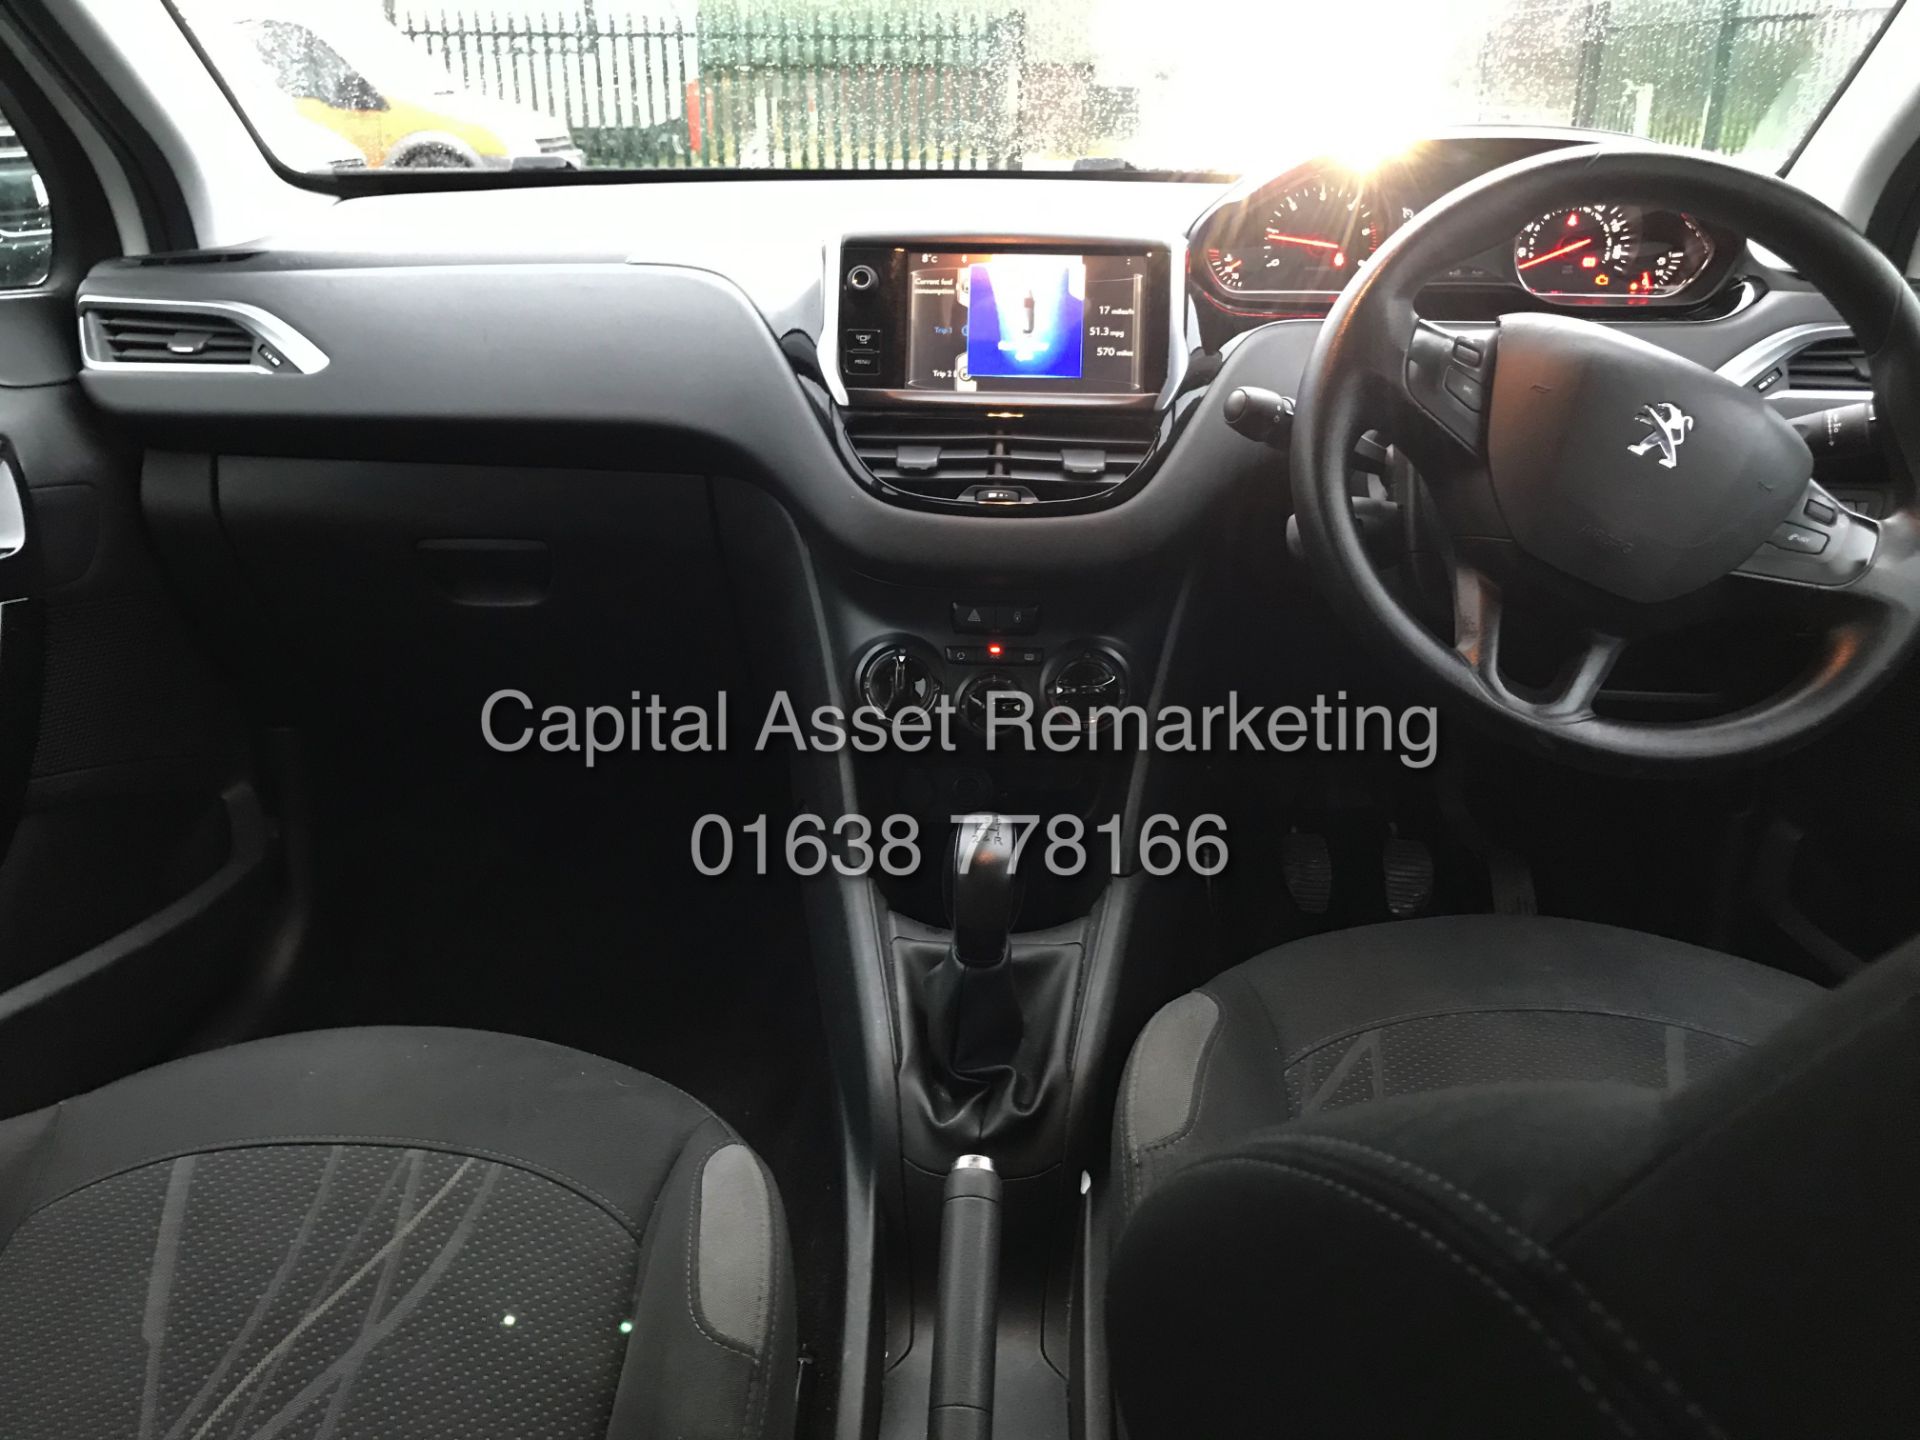 (ON SALE) PEUGEOT 208 1.4HDI "ACTIVE" 1 PREVIOUS KEEPER FSH (14 REG) RECENT SERVICE-AIR CON *NO VAT* - Image 12 of 23